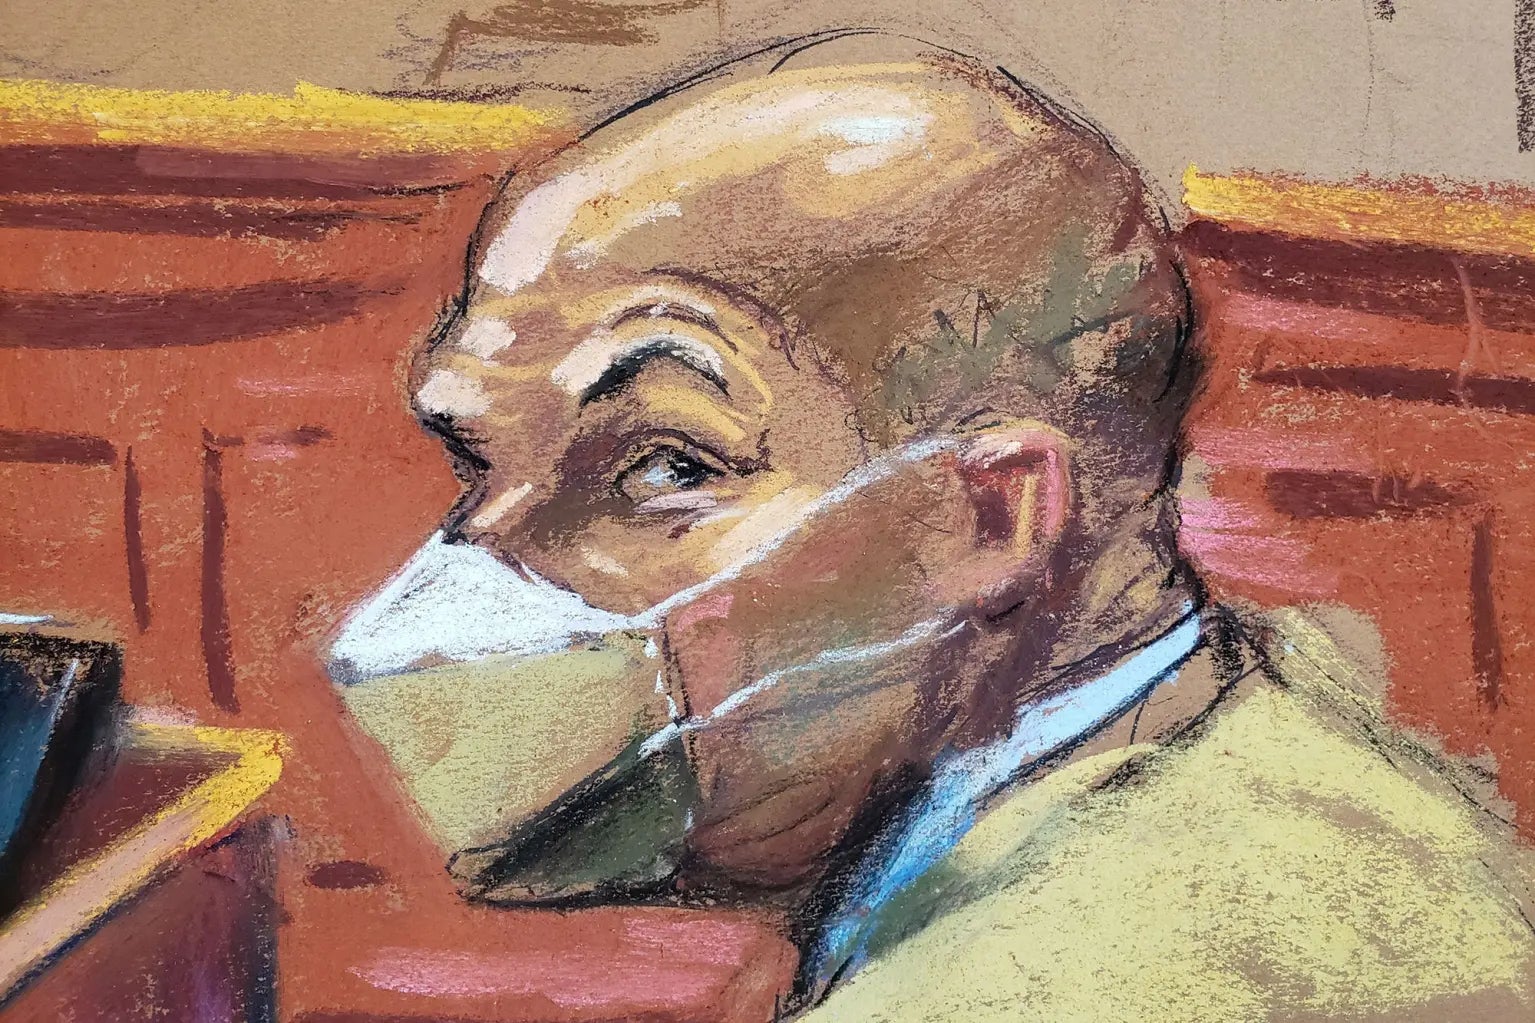 A courtroom sketch of Larry Ray.